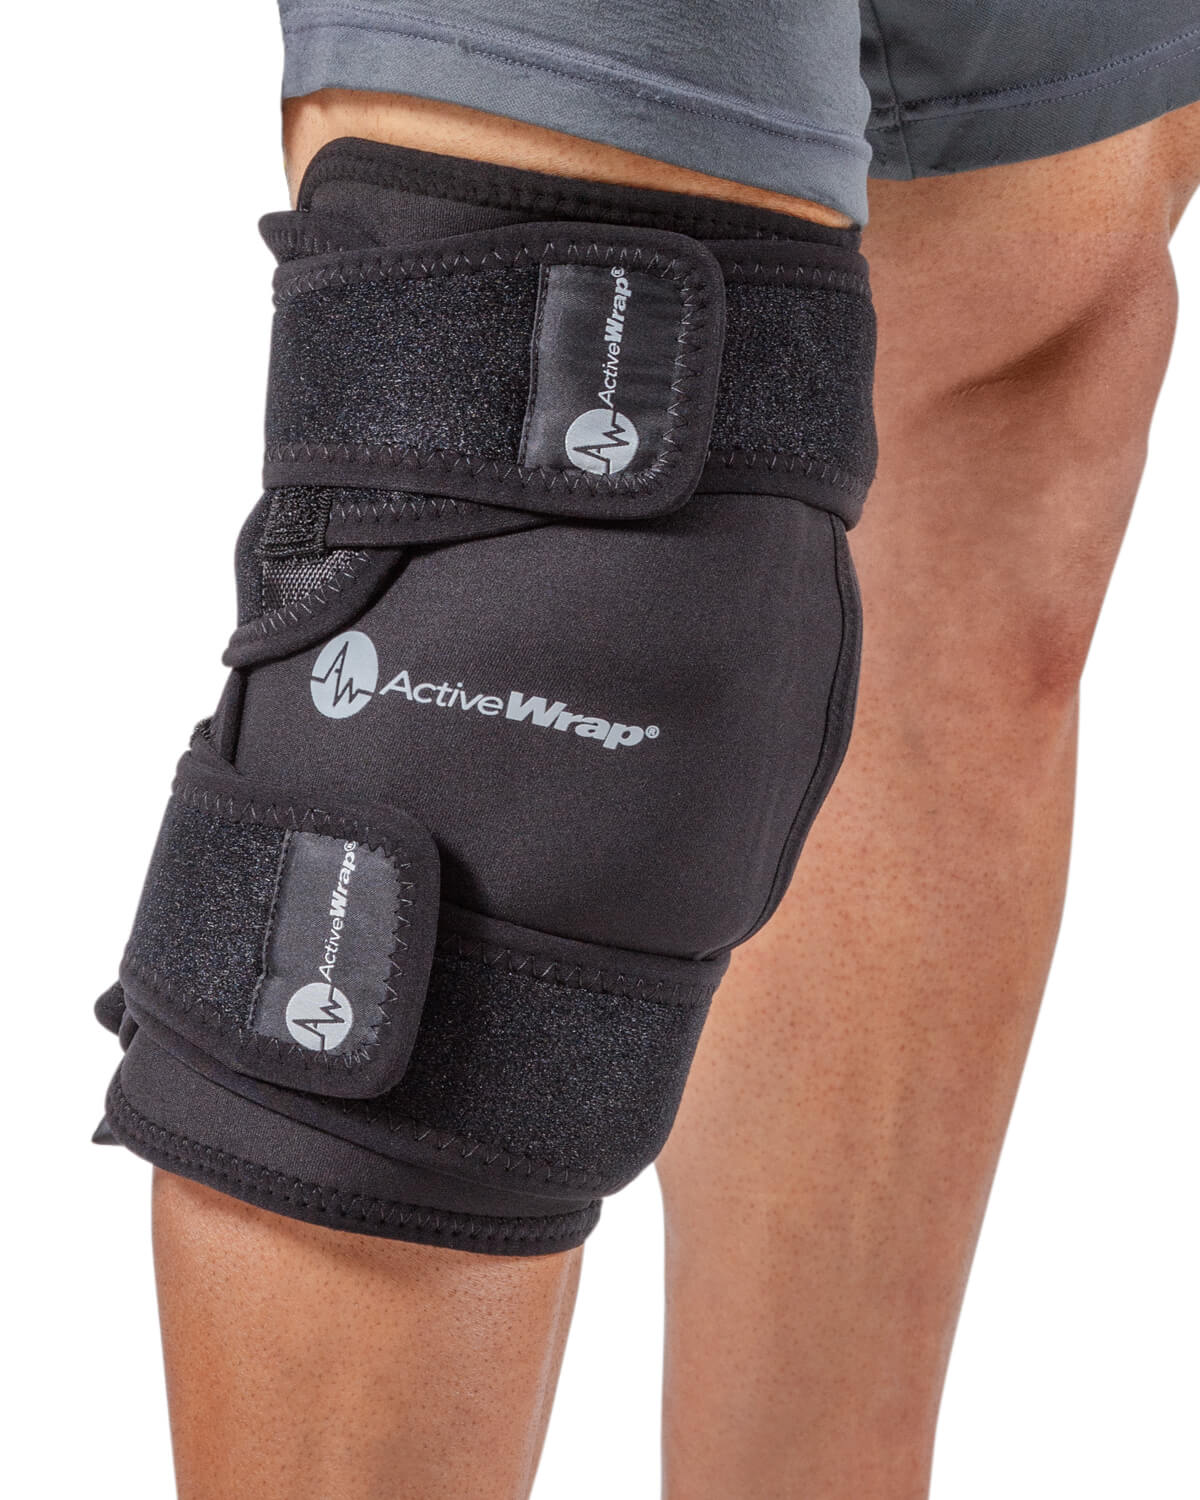 Thermo Wrap Knee Support